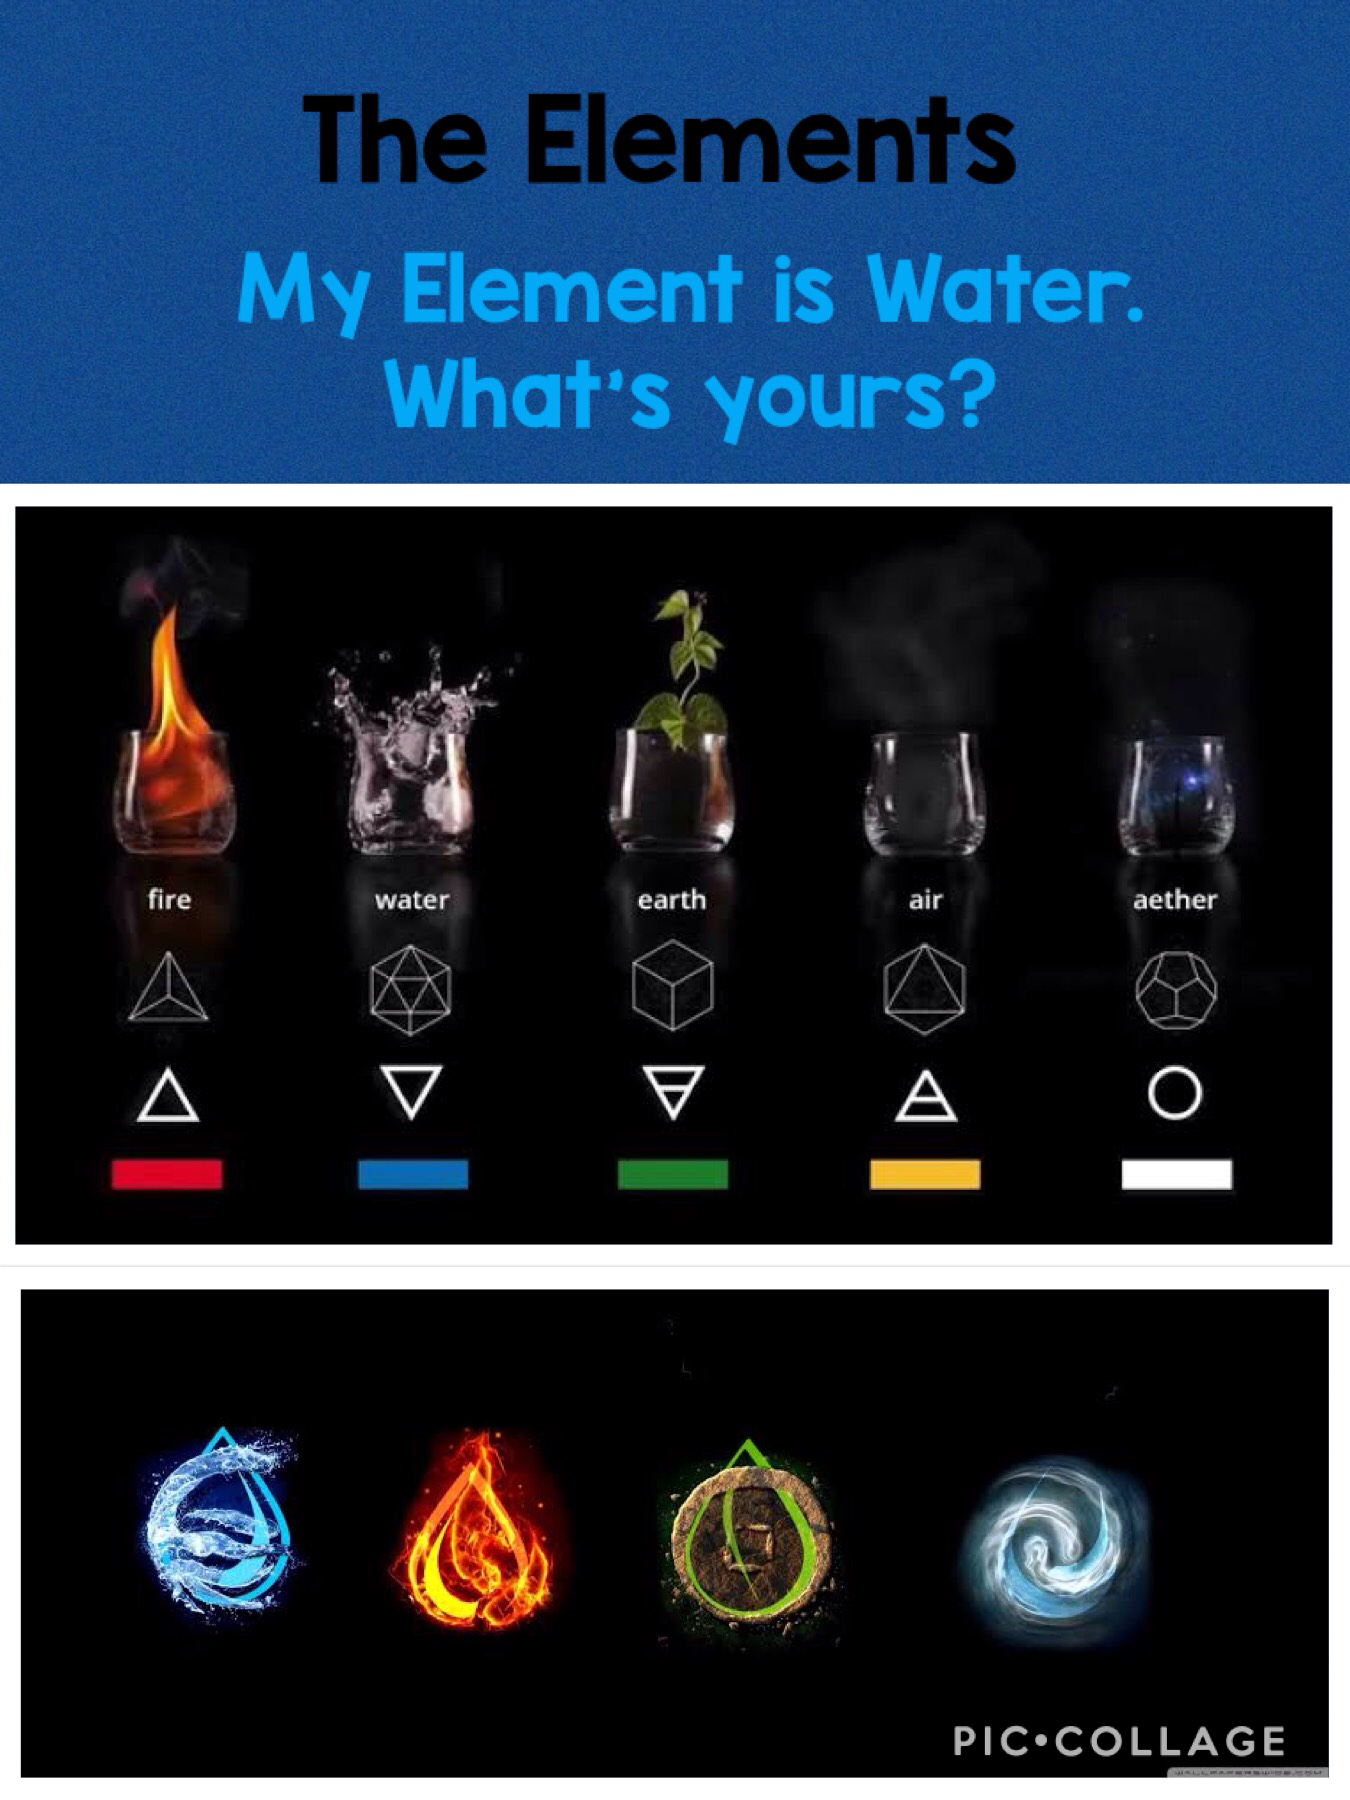 Y Elenent s actually are because I am a Gemini but feel ore confotable wth water.